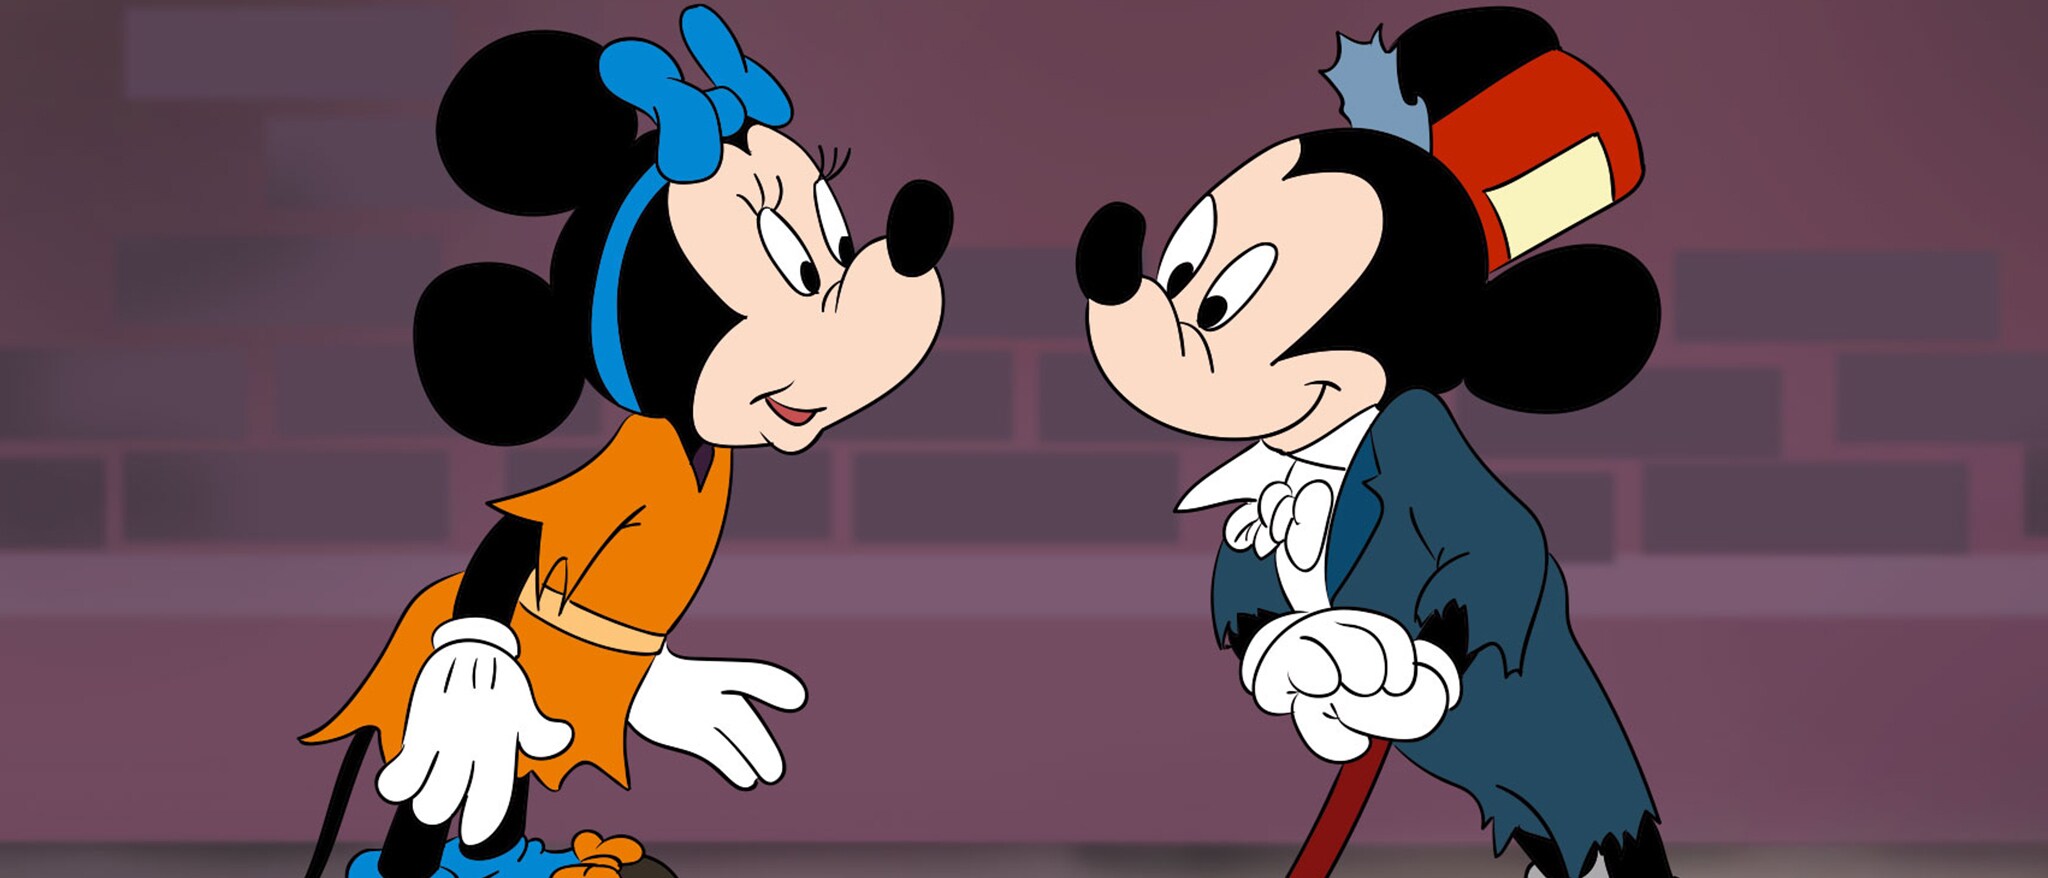 Mickey & Minnie: 10 Classic Shorts - Volume 1 - Featured Content Banner